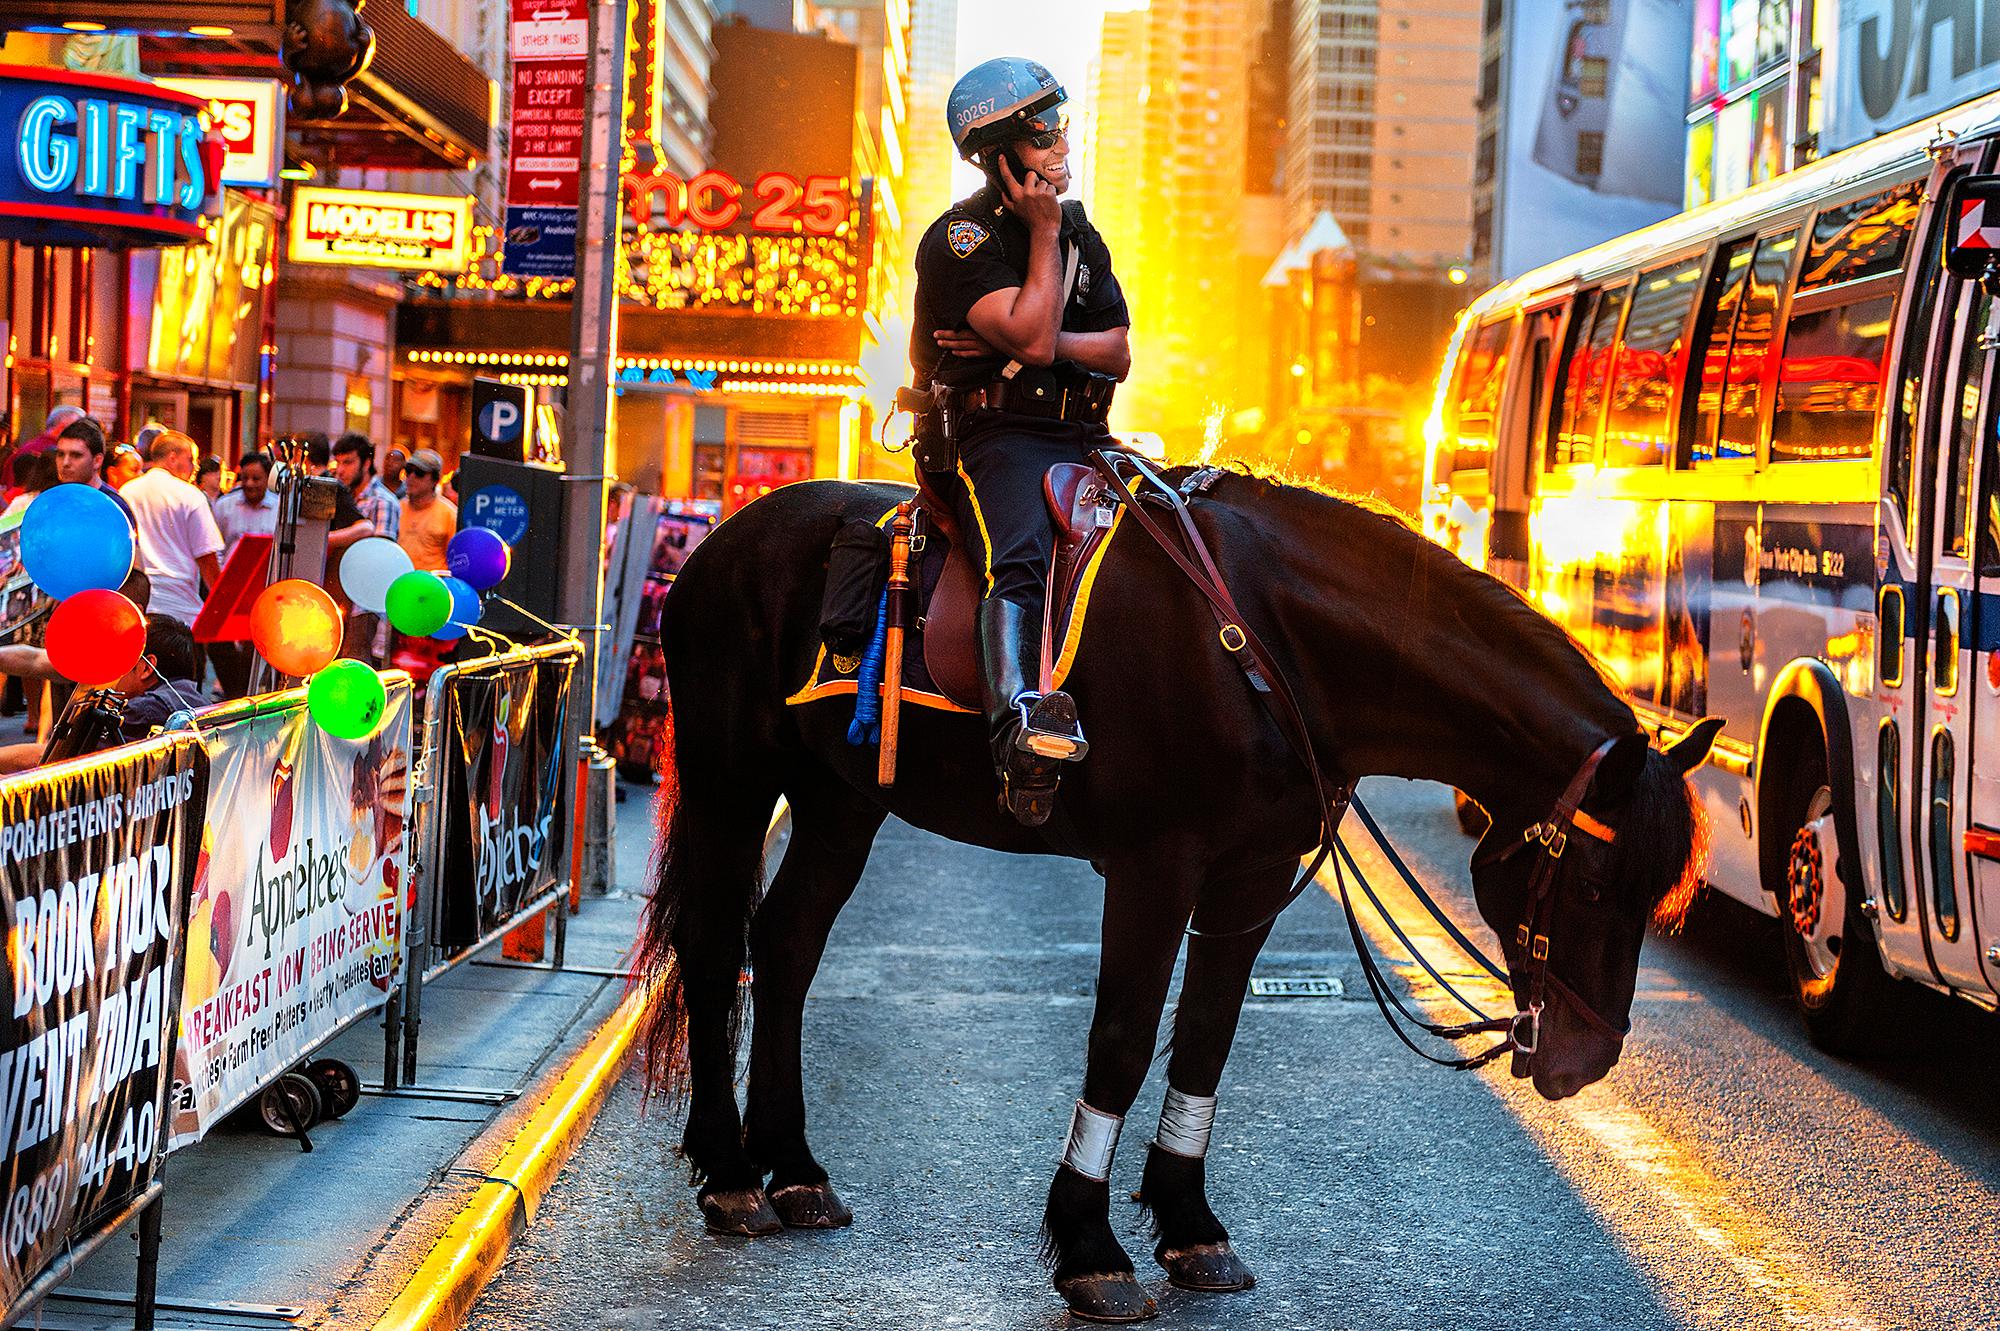 Mitchell Funk Portrait Photograph – Laughing Policeman on Horse 42nd Street Times Square Golden Light